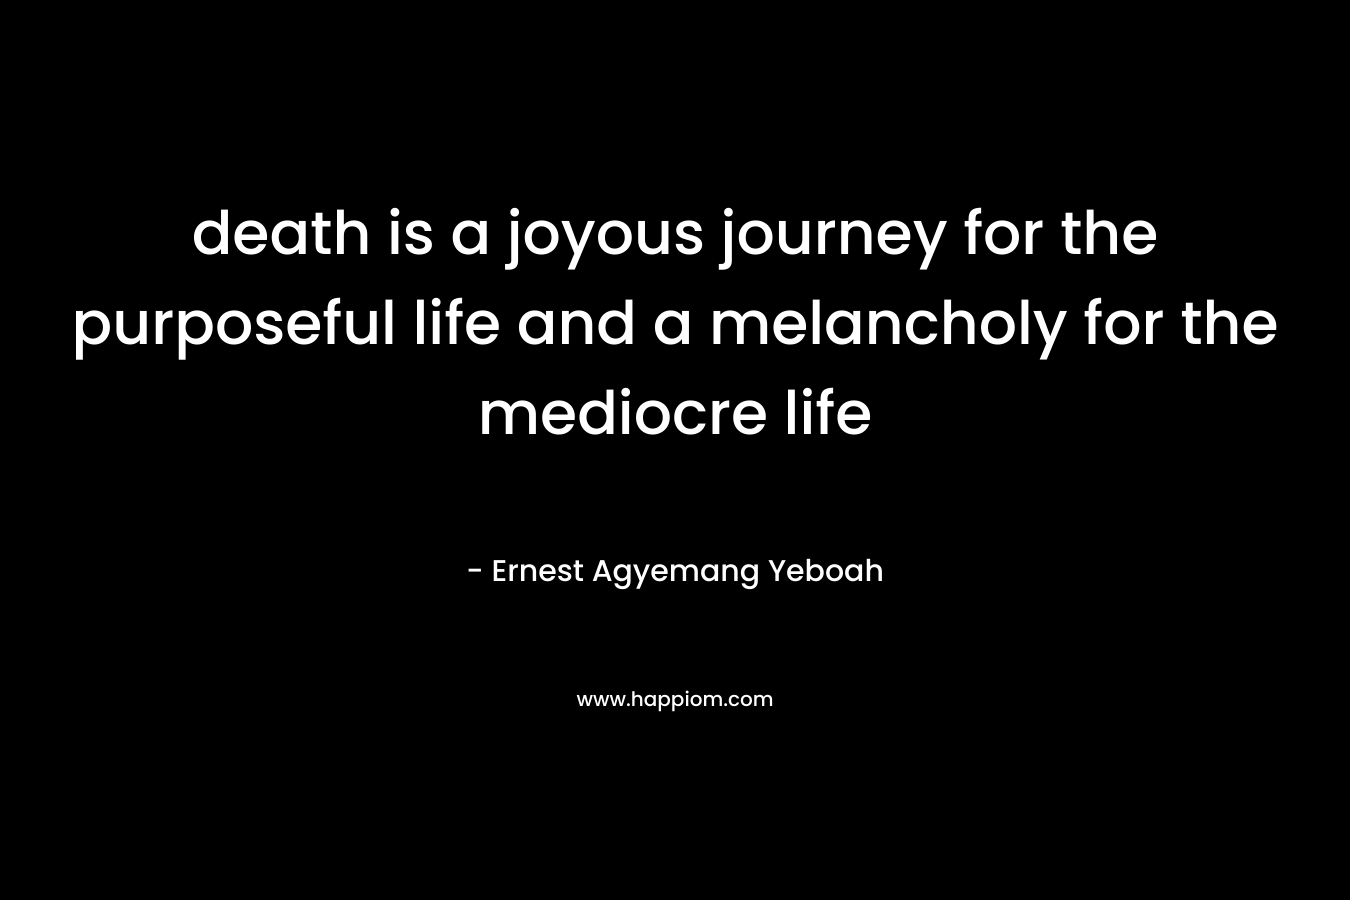 death is a joyous journey for the purposeful life and a melancholy for the mediocre life